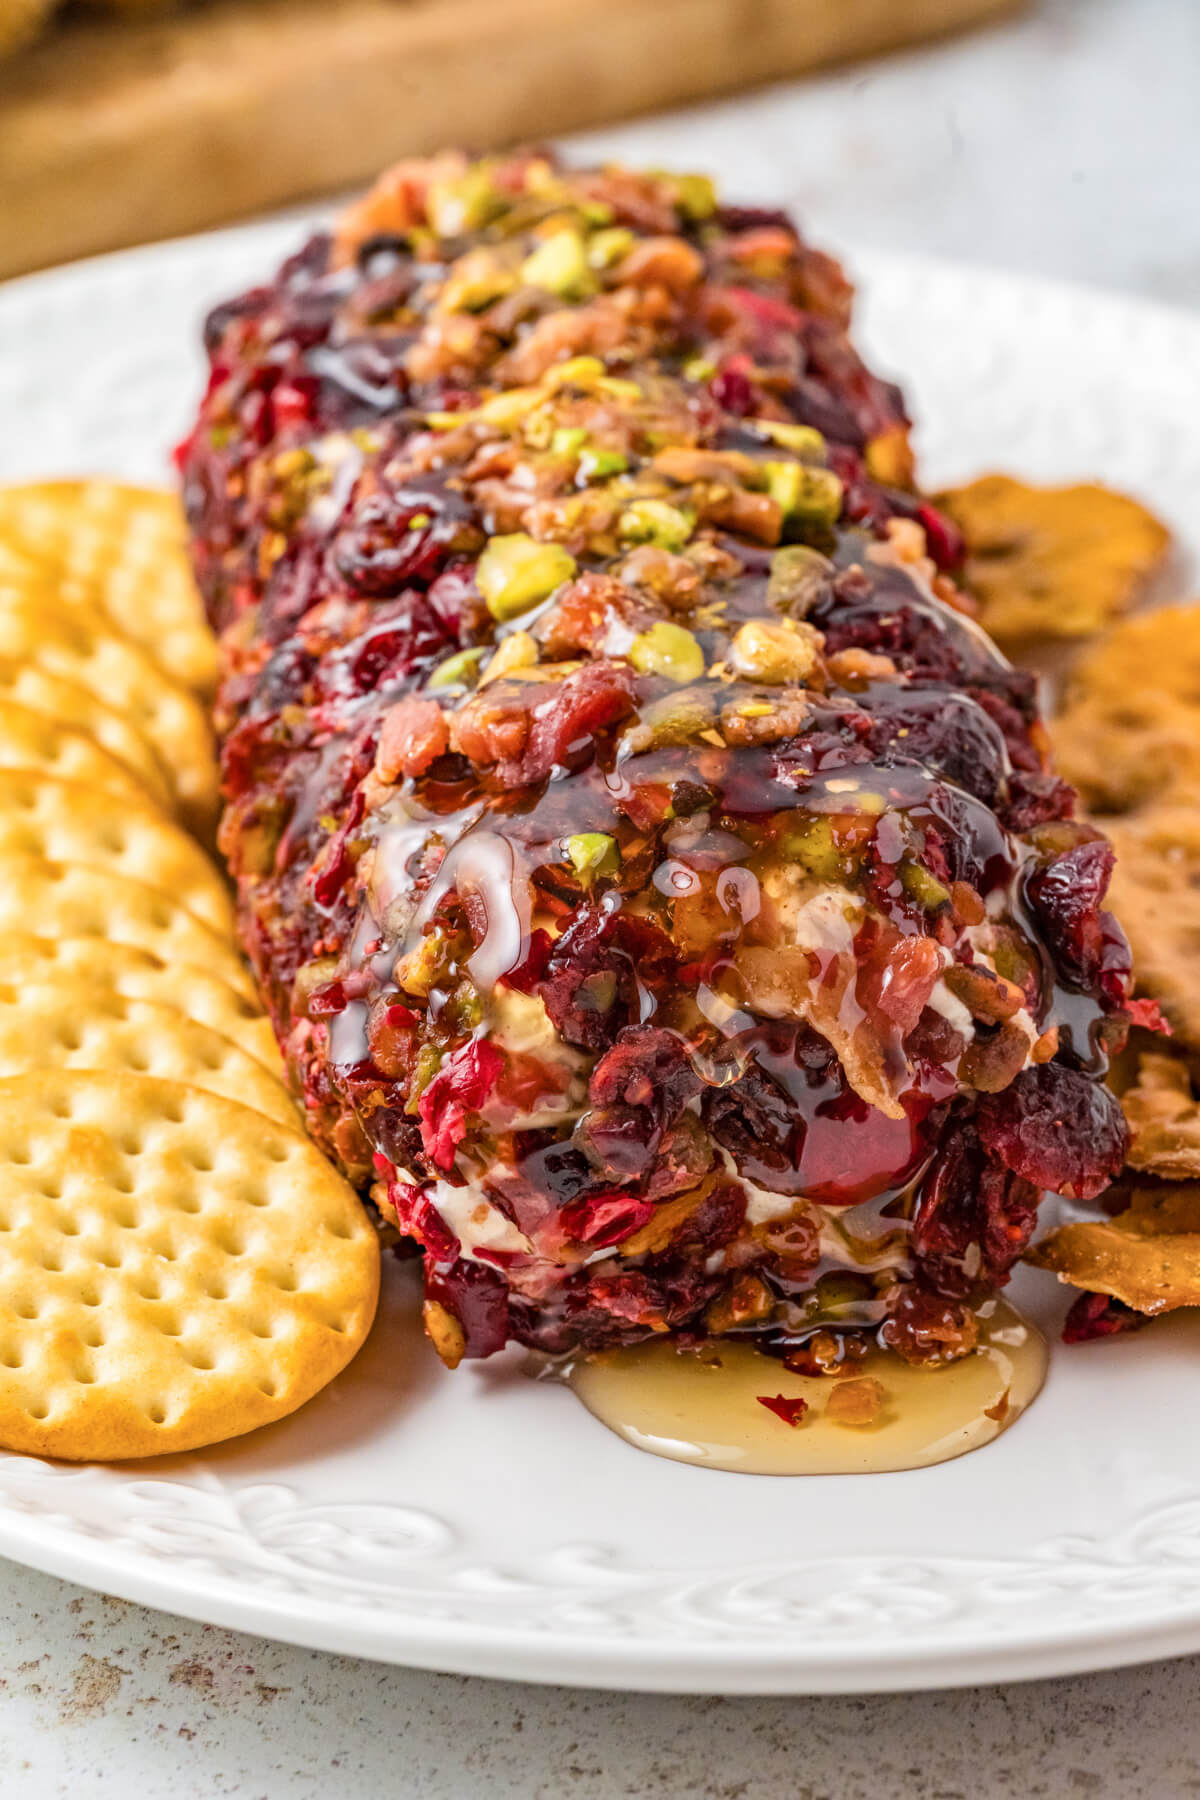 A whole honey coated pistachio and cranberry cheese log on a white plate surrounded by crackers.